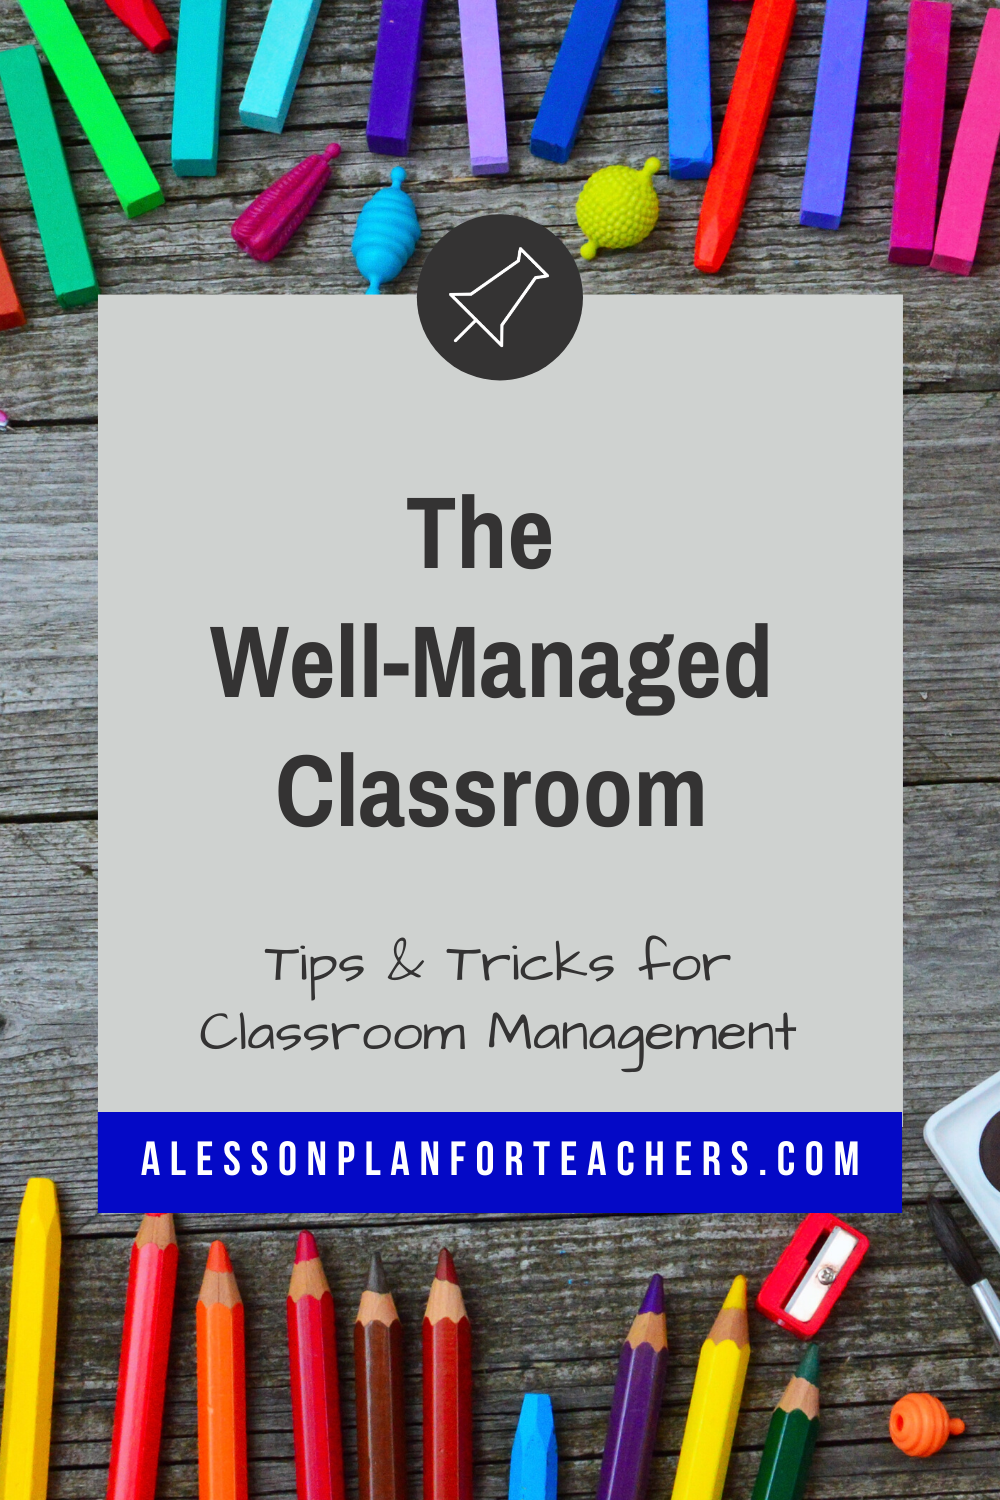 Using the tools for success to help you implement a foolproof classroom management plan now will reduce much stress later! #classroommanagement #managingyourclassroom #classroomorganization #classroomexpectations #teachermanagement